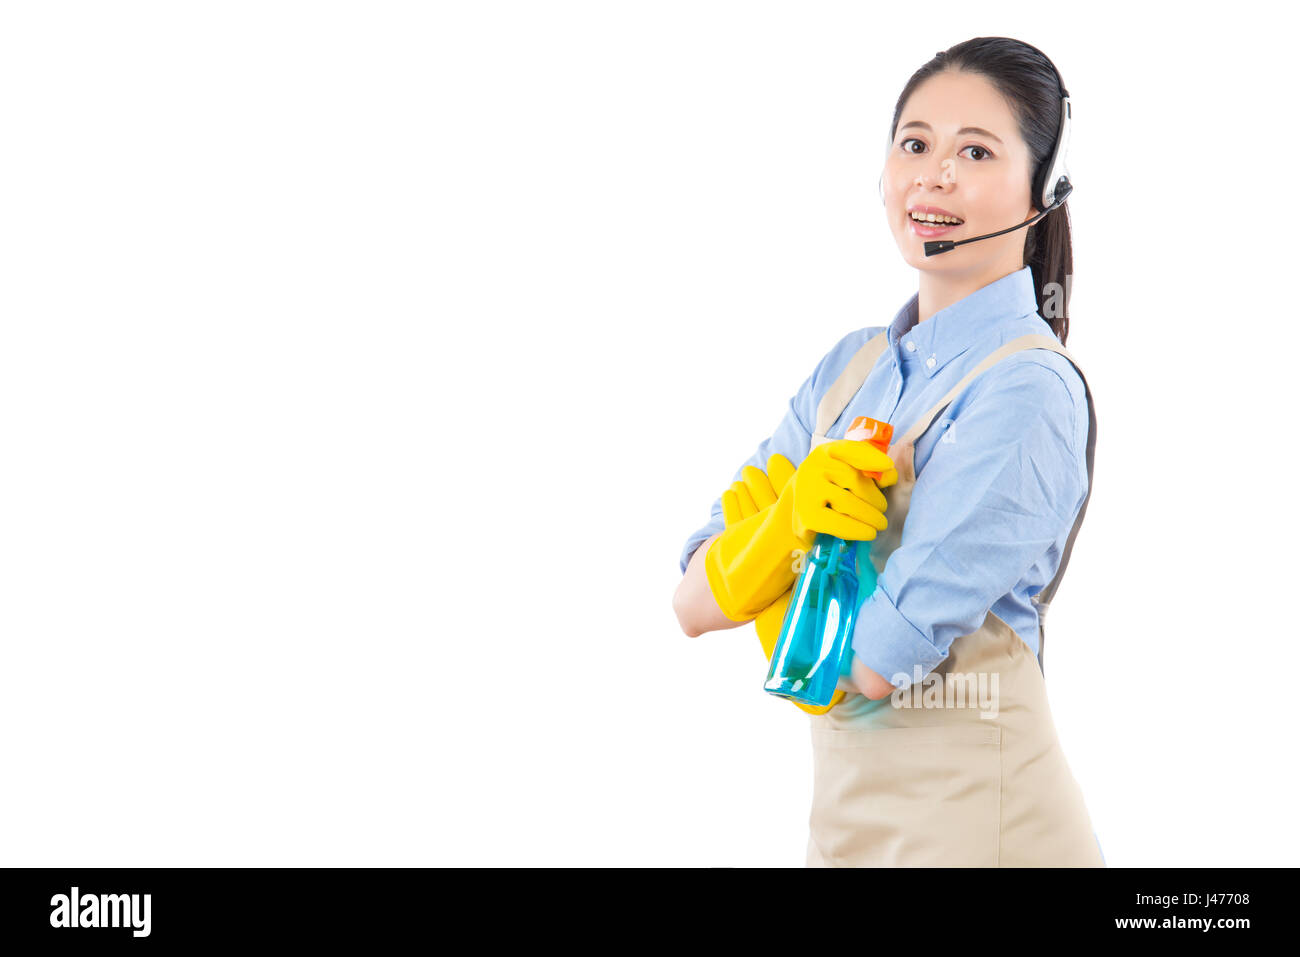 beautiful woman using headset microphone for professional house cleaning online services holding detergent spray bottle. isolated on white background. Stock Photo